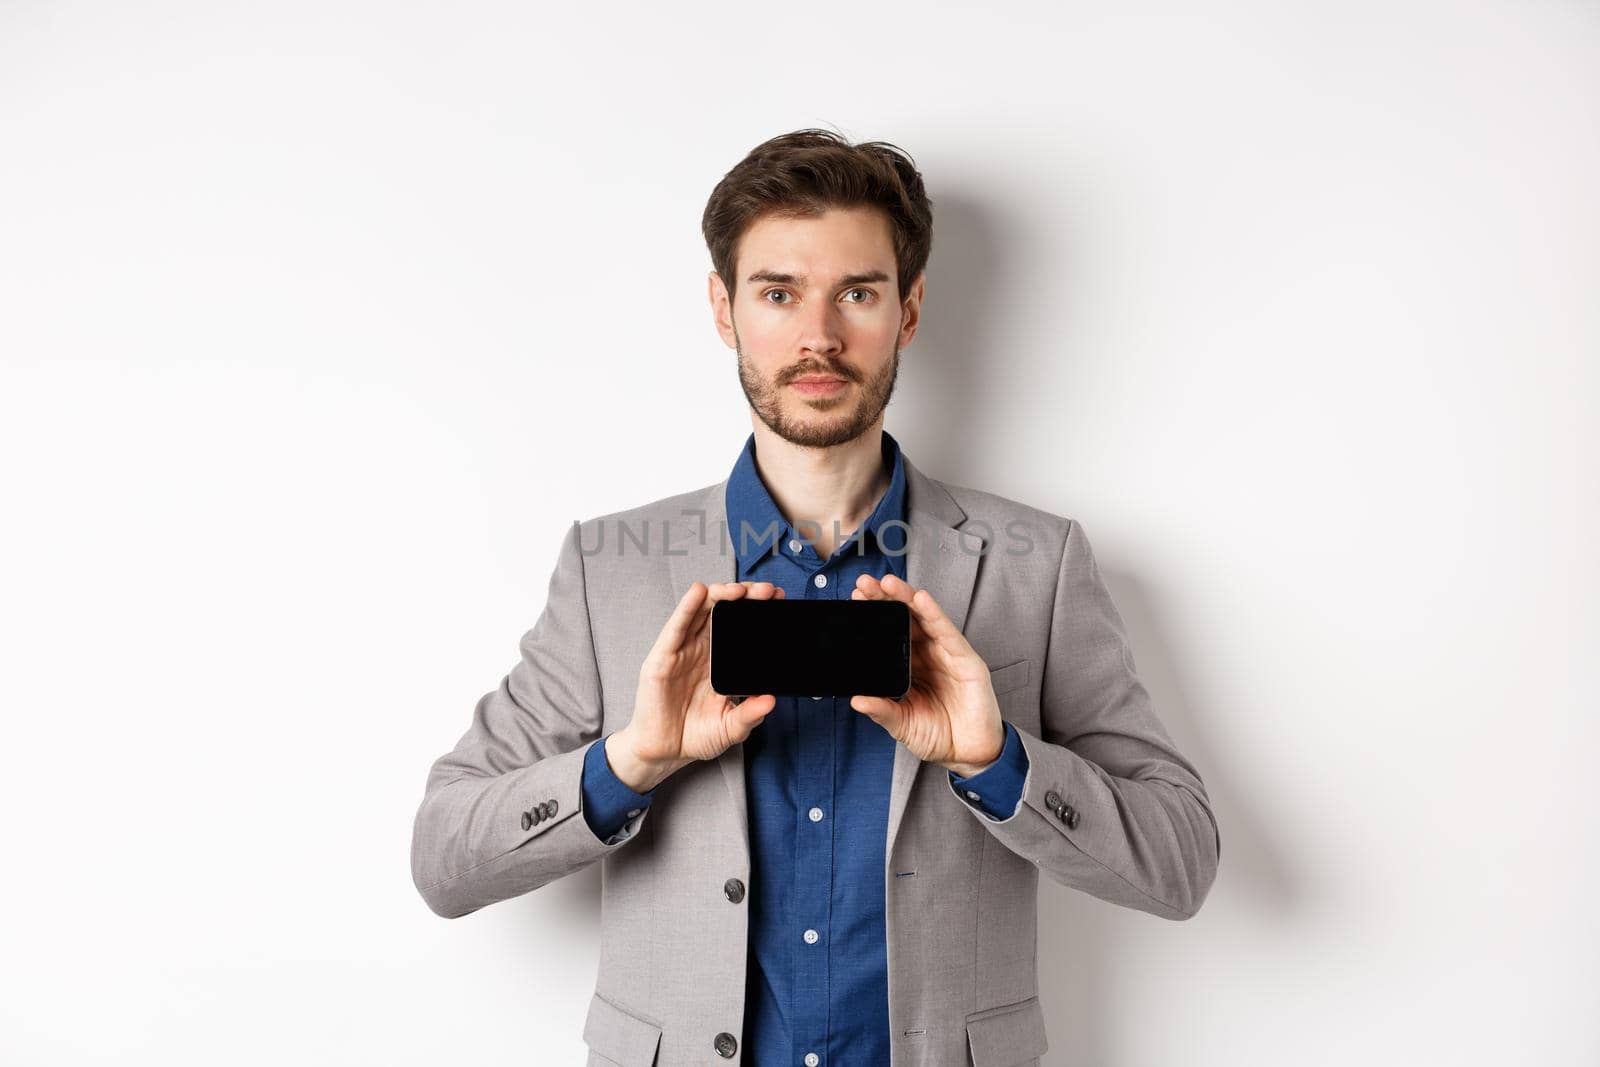 E-commerce and online shopping concept. Serious young man in suit showing empty smartphone screen horizontal, standing on white background.